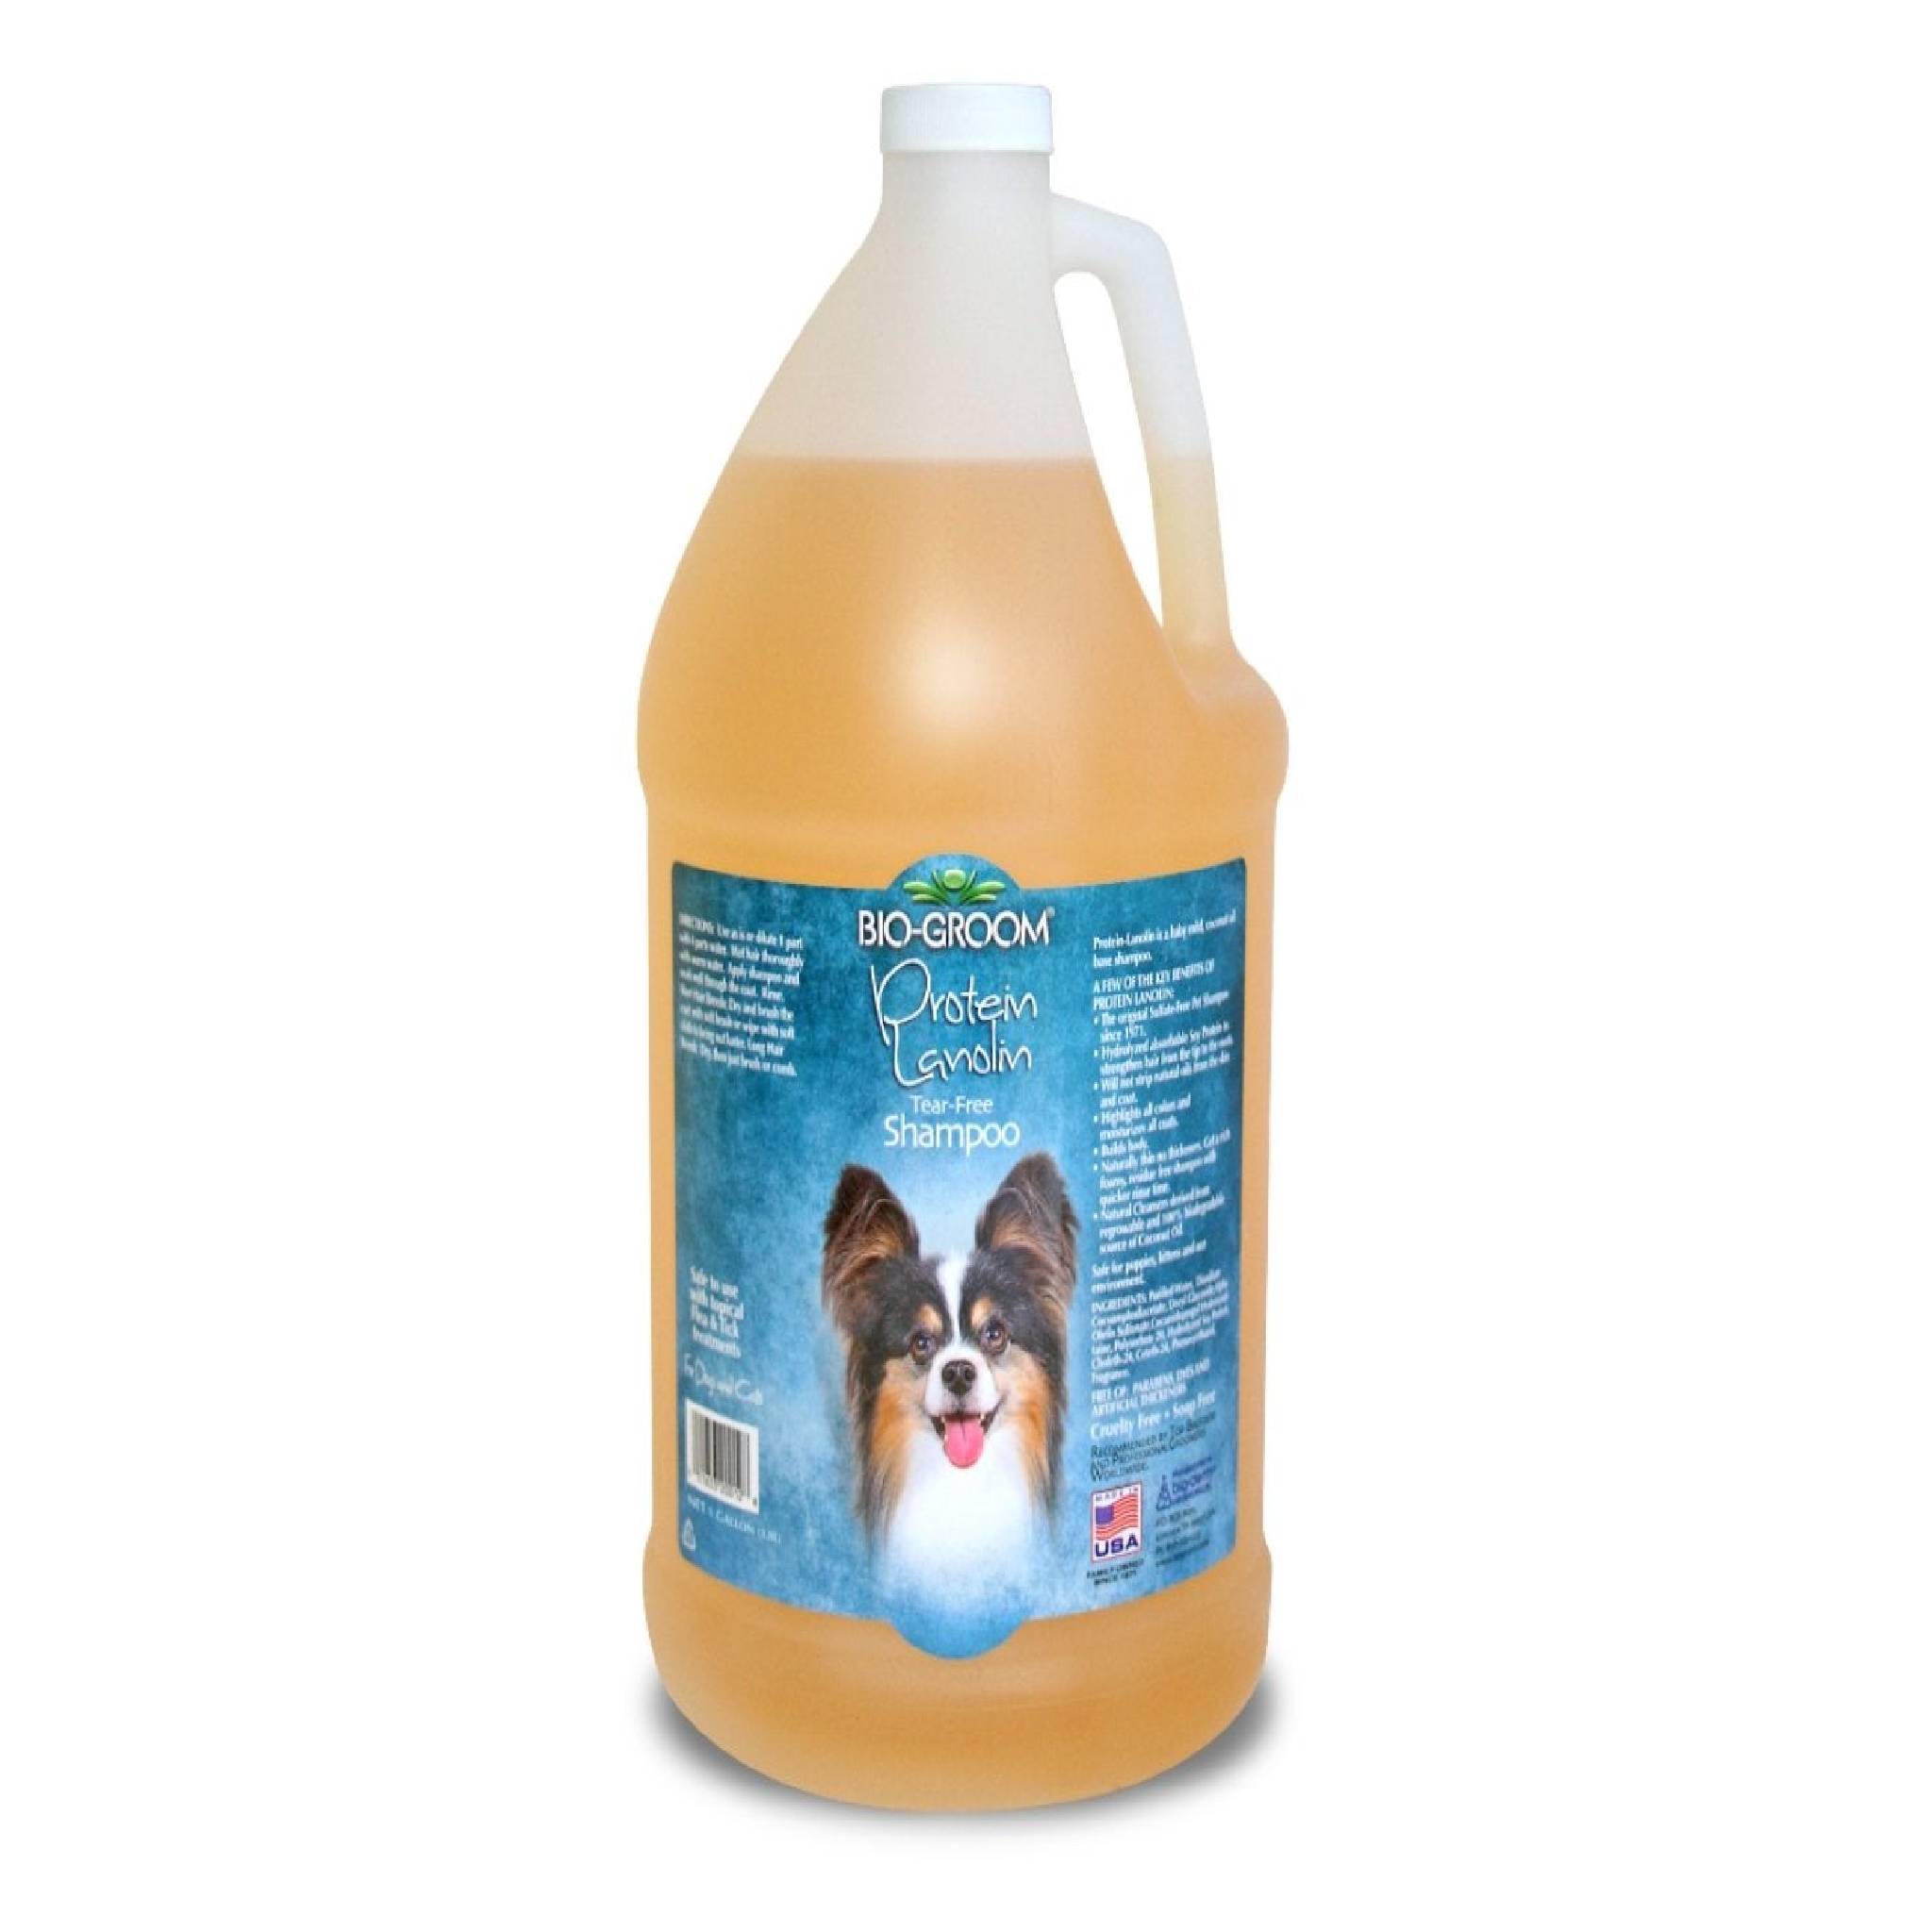 Bio-Groom Protein Lanolin Tear Free Pet Grooming Shampoo for Cats and Dogs-3.8 Litres